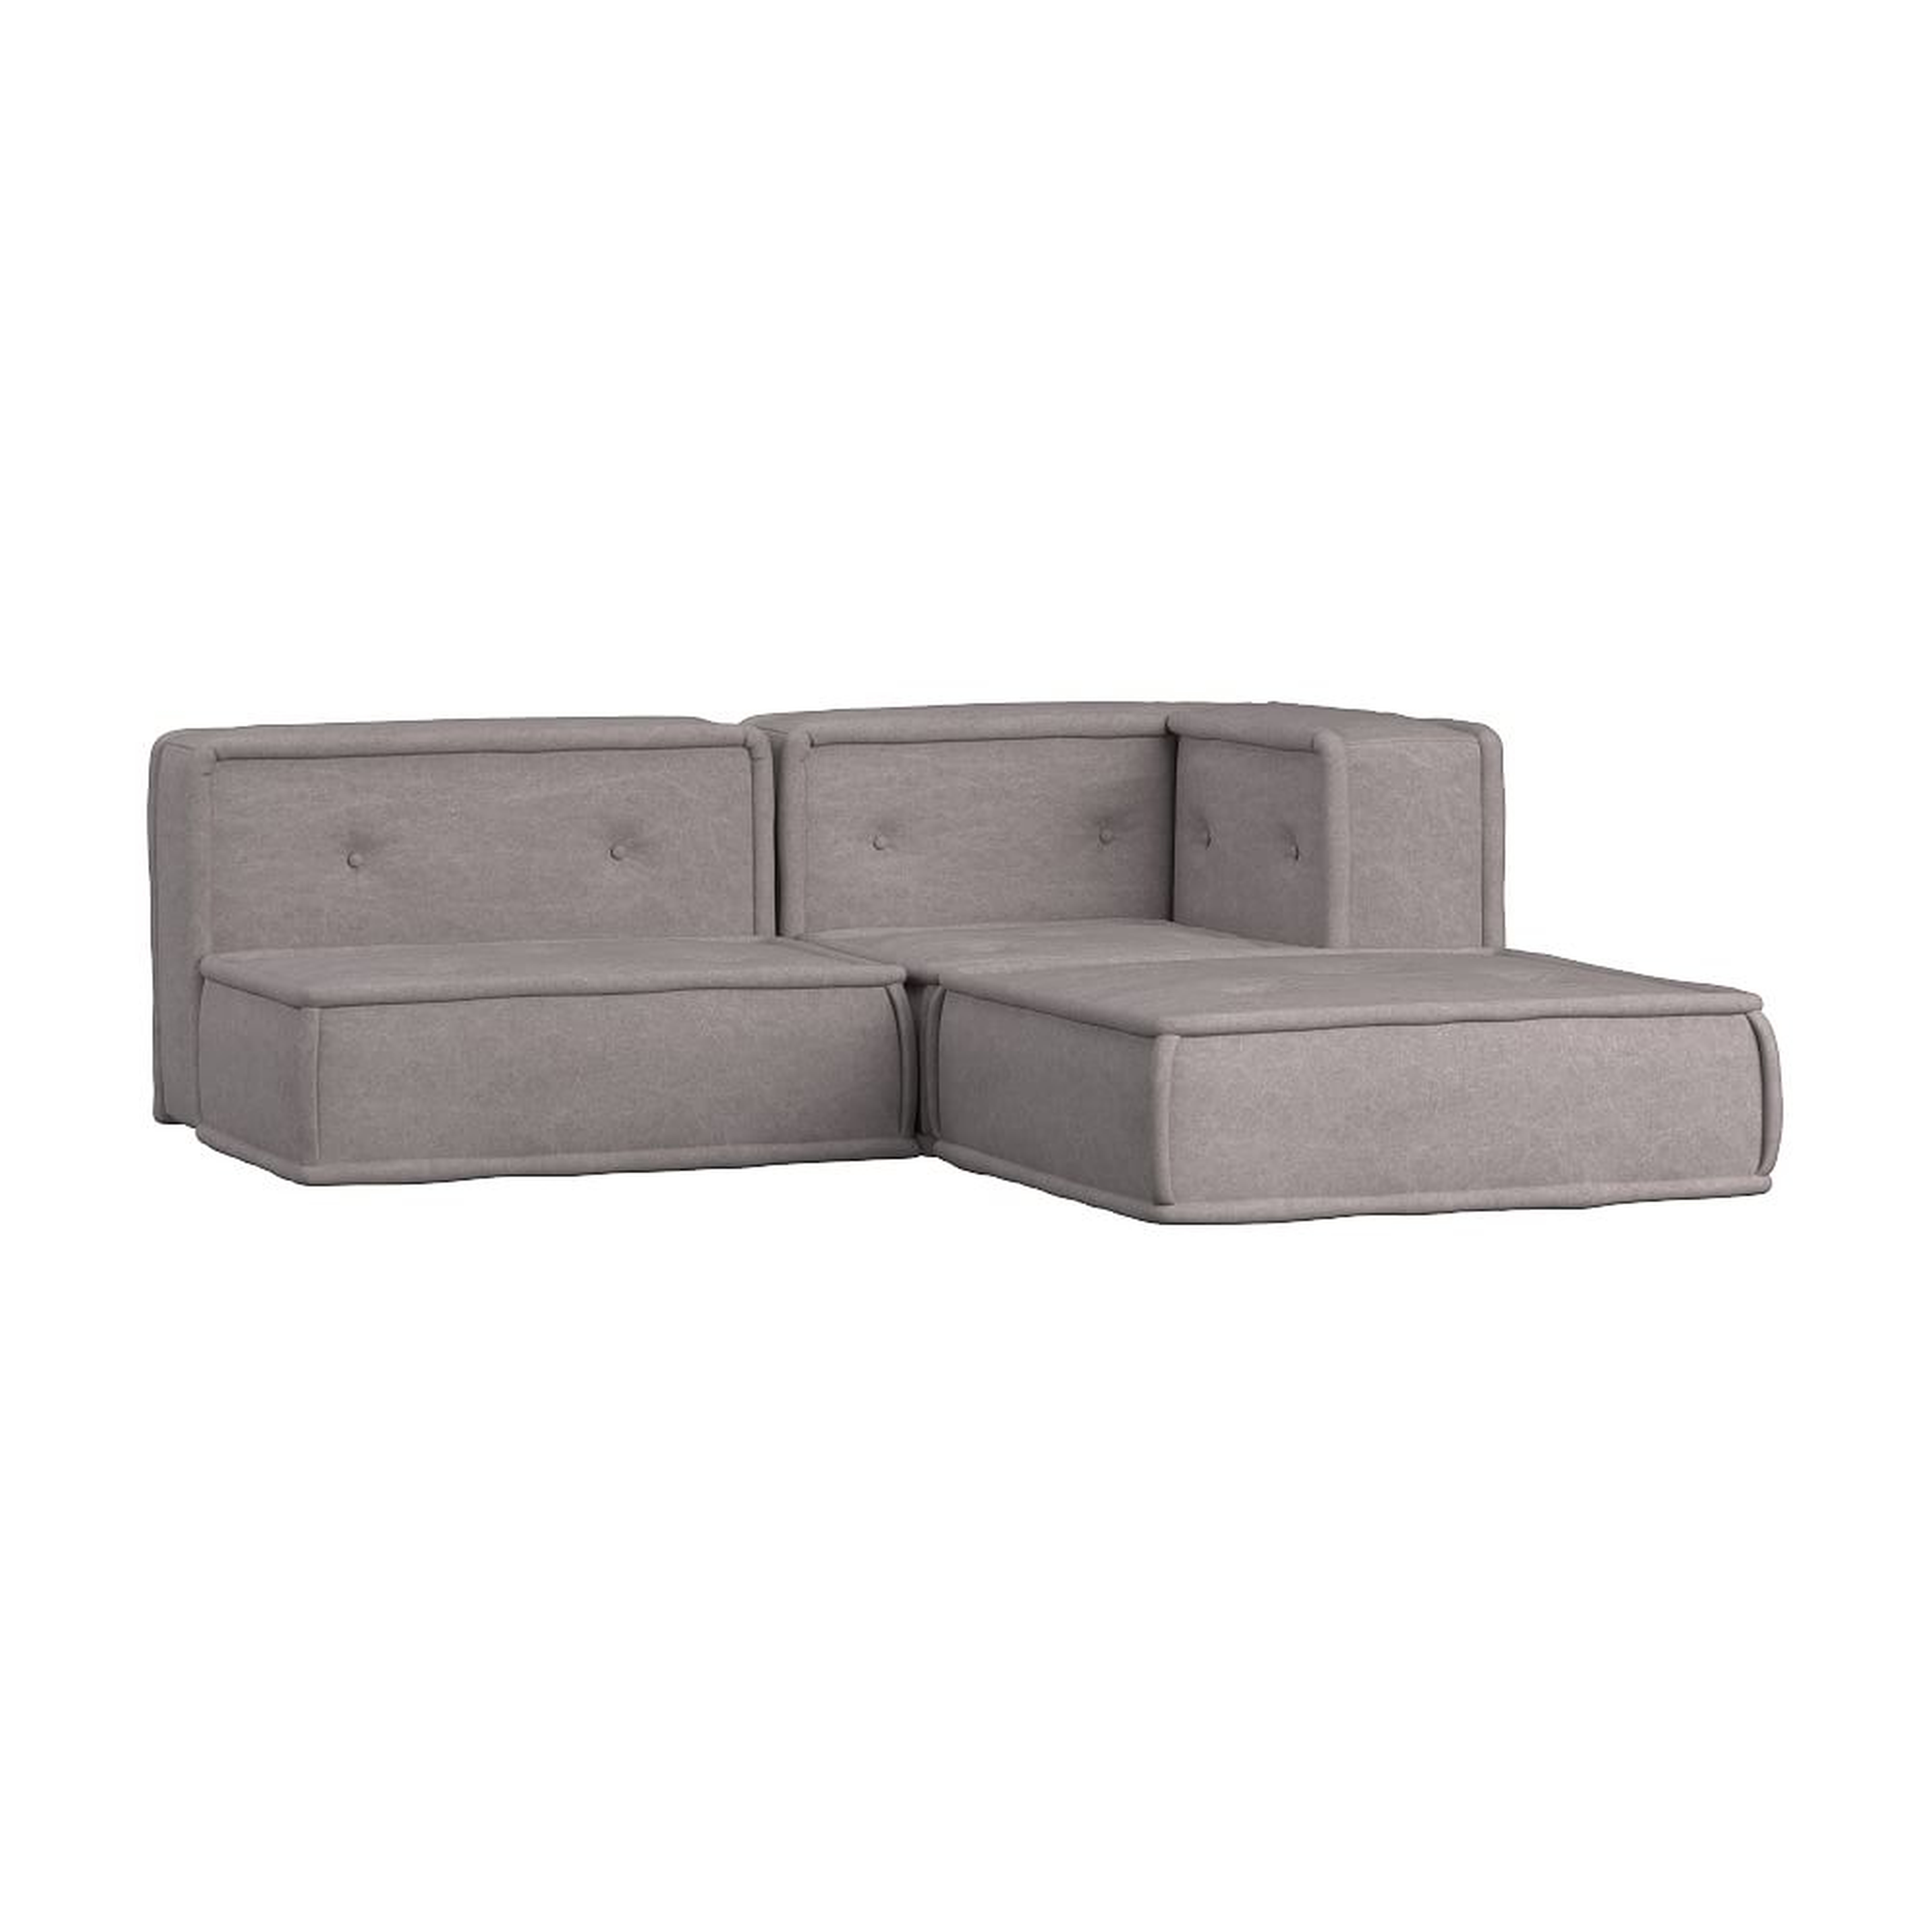 Cushy Sectional Set, Enzyme Washed Canvas Gray - Pottery Barn Teen